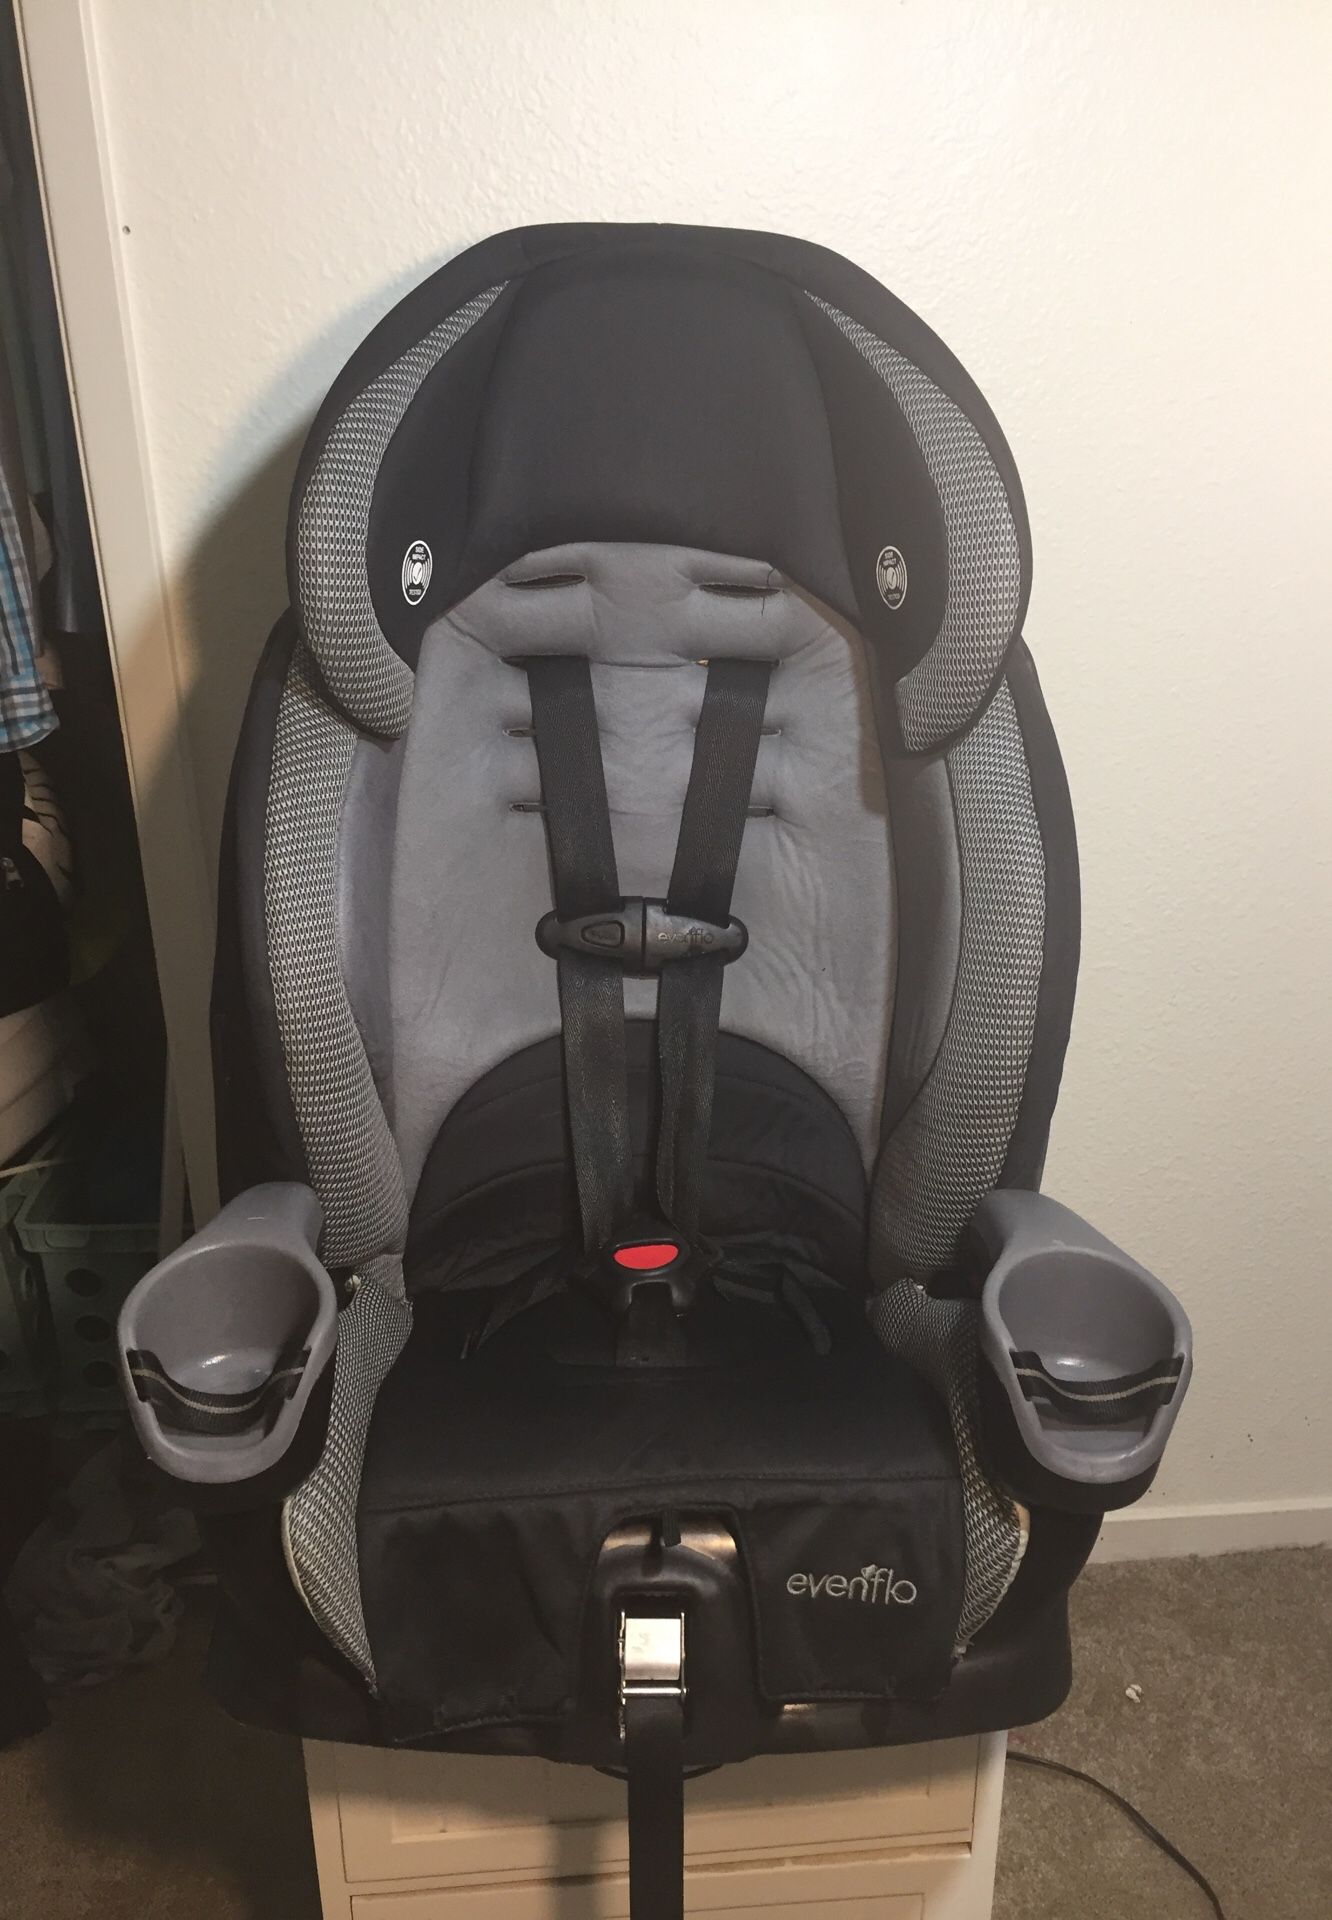 event love Car seat make condition had it for back up